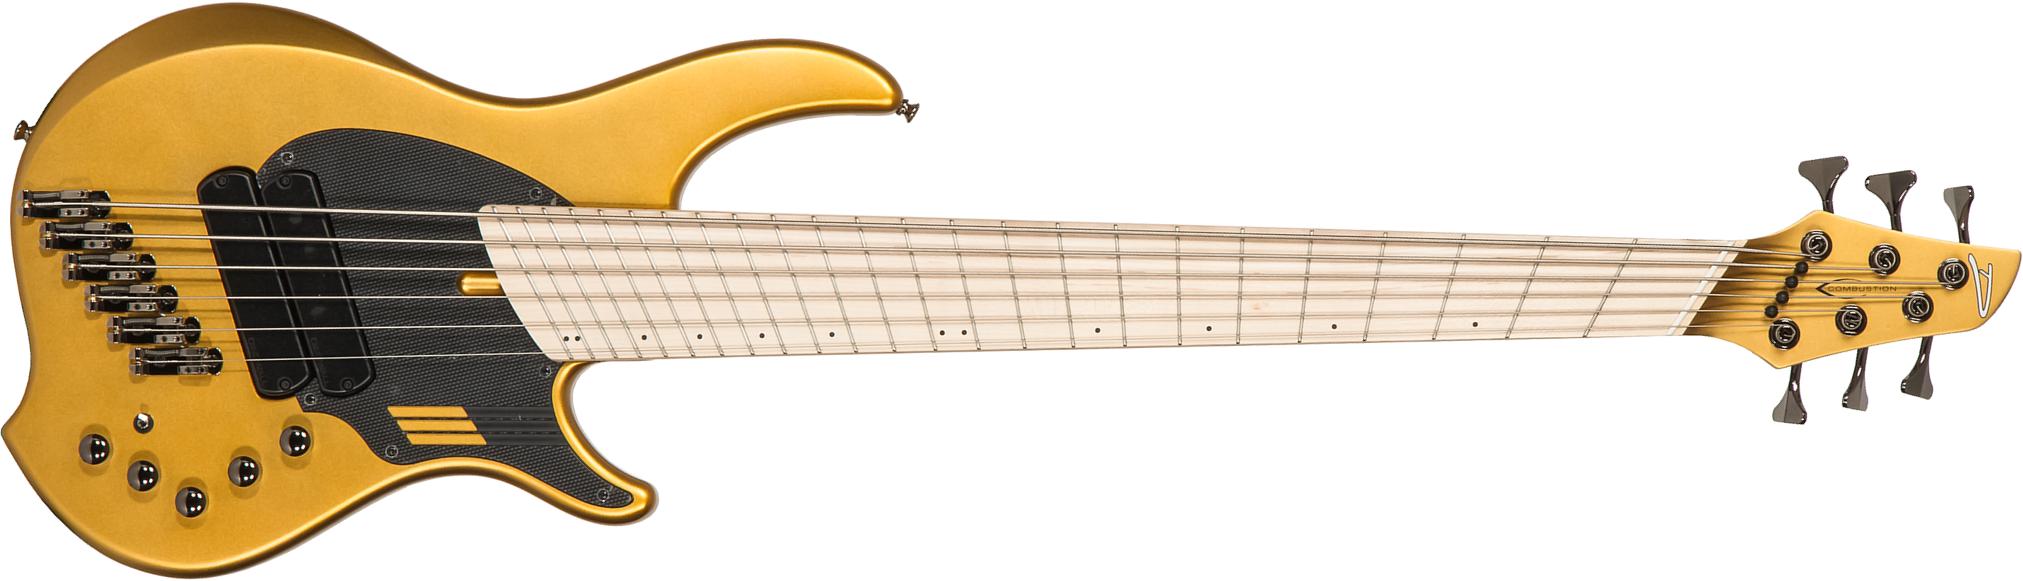 Dingwall Adam Nolly Getgood Ng2 6c 2pu Signature Active Mn - Gold Matte - Basse Électrique Solid Body - Main picture